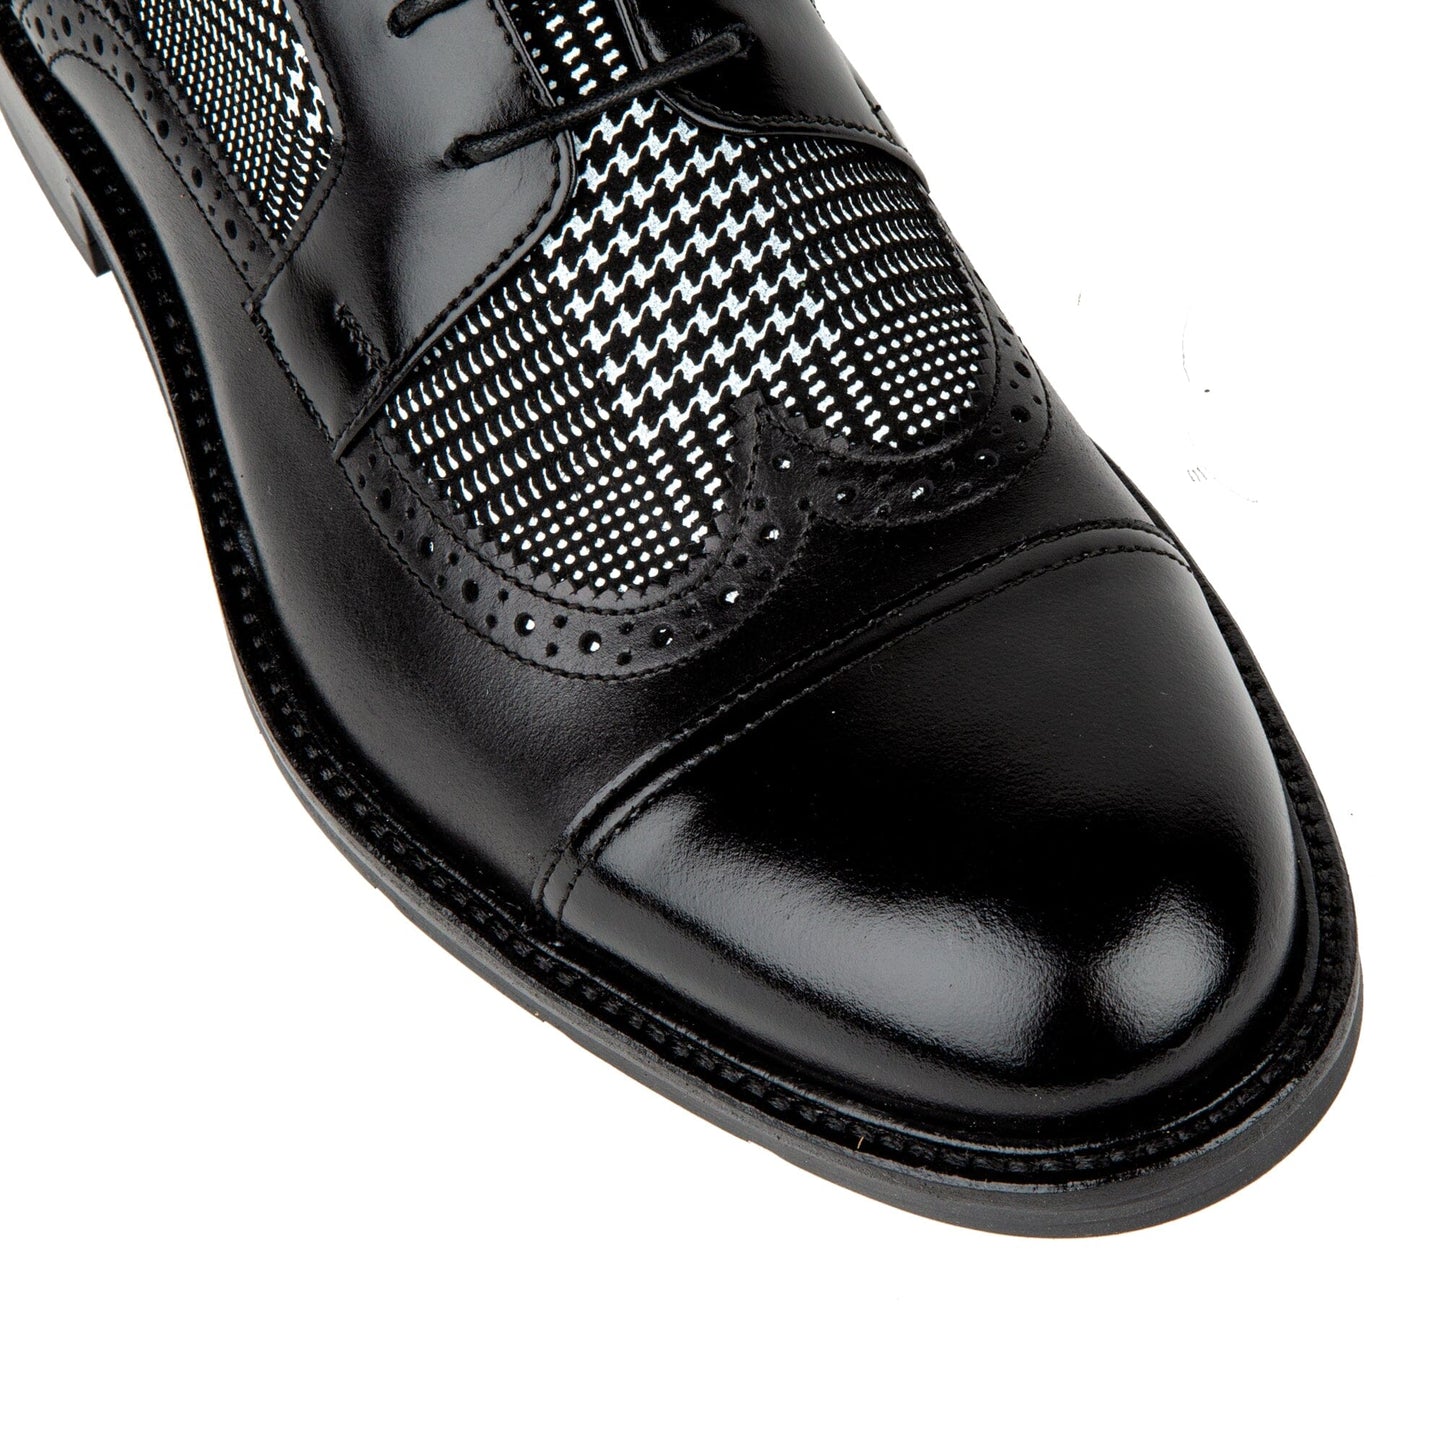 Charles - Black Check Ankle Boots Embassy London 